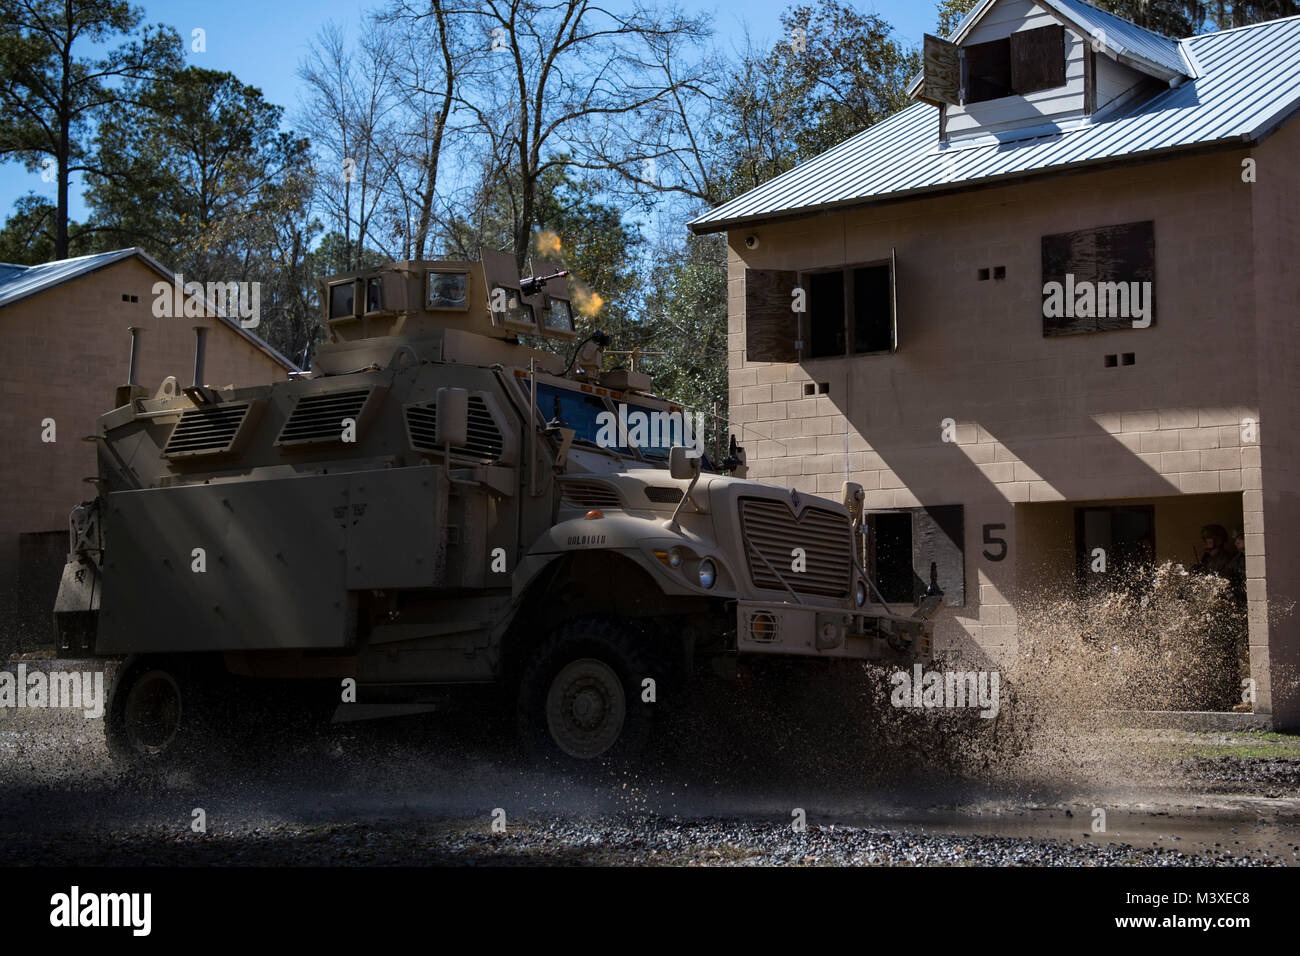 Airmen assigned to the 820th Base Defense Group drive a mine-resistant, ambush-protected vehicle during a capabilities demonstration, Feb. 5, 2018, at Moody Air Force Base, Ga. The immersion was designed to give the 23d Wing’s leadership a better understanding of the 820th BDG’s mission, capabilities and training needs. (U.S. Air Force photo by Senior Airman Daniel Snider) Stock Photo